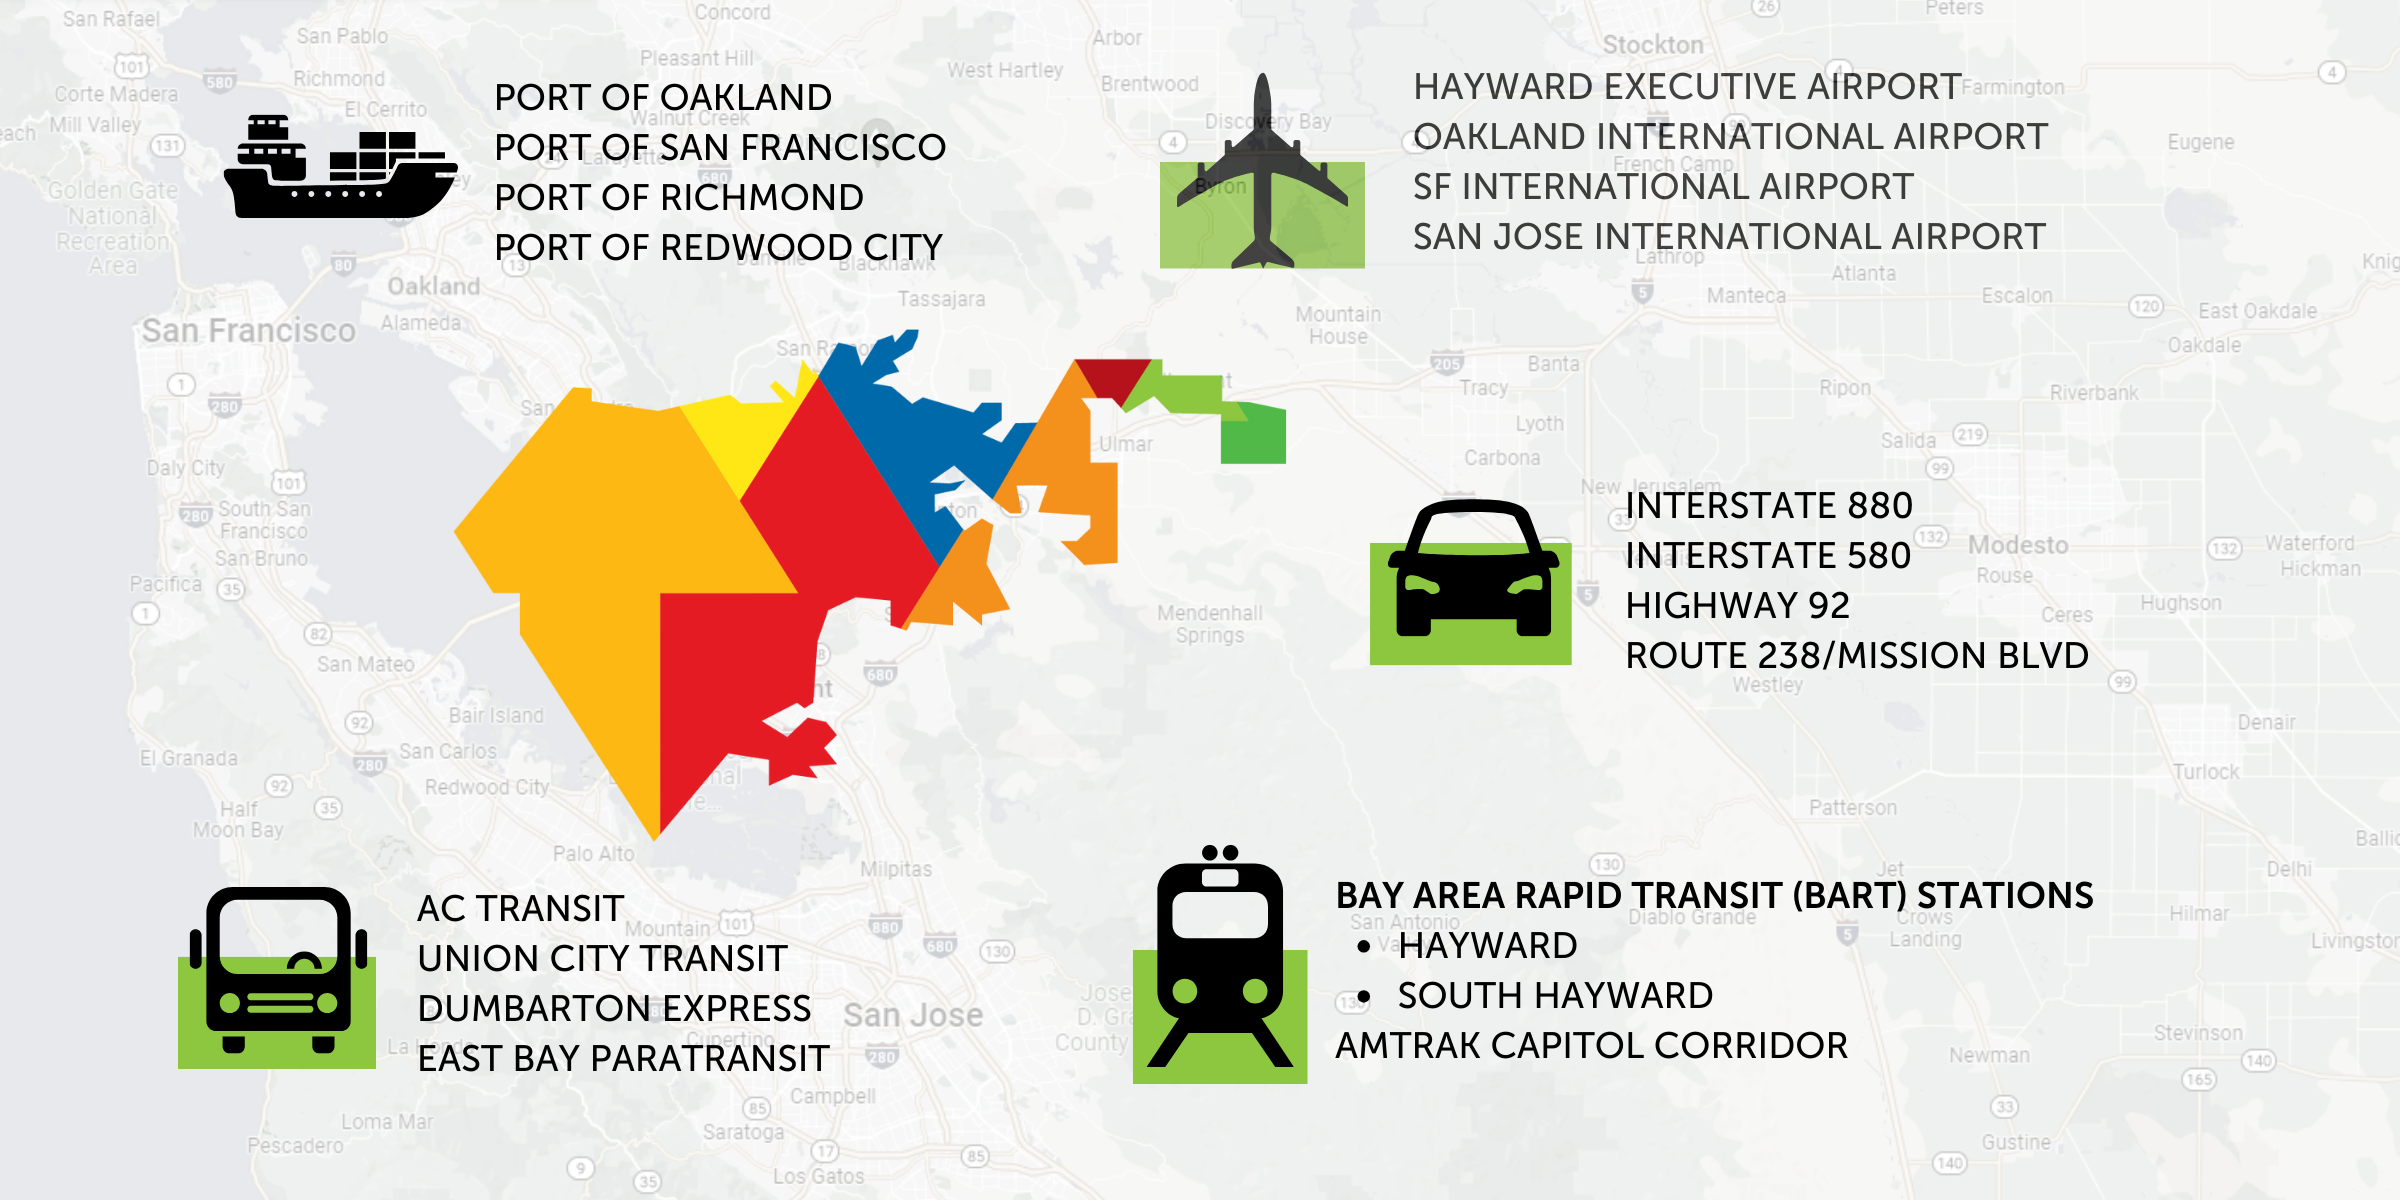 A map of Hayward highlighting some of the transit options